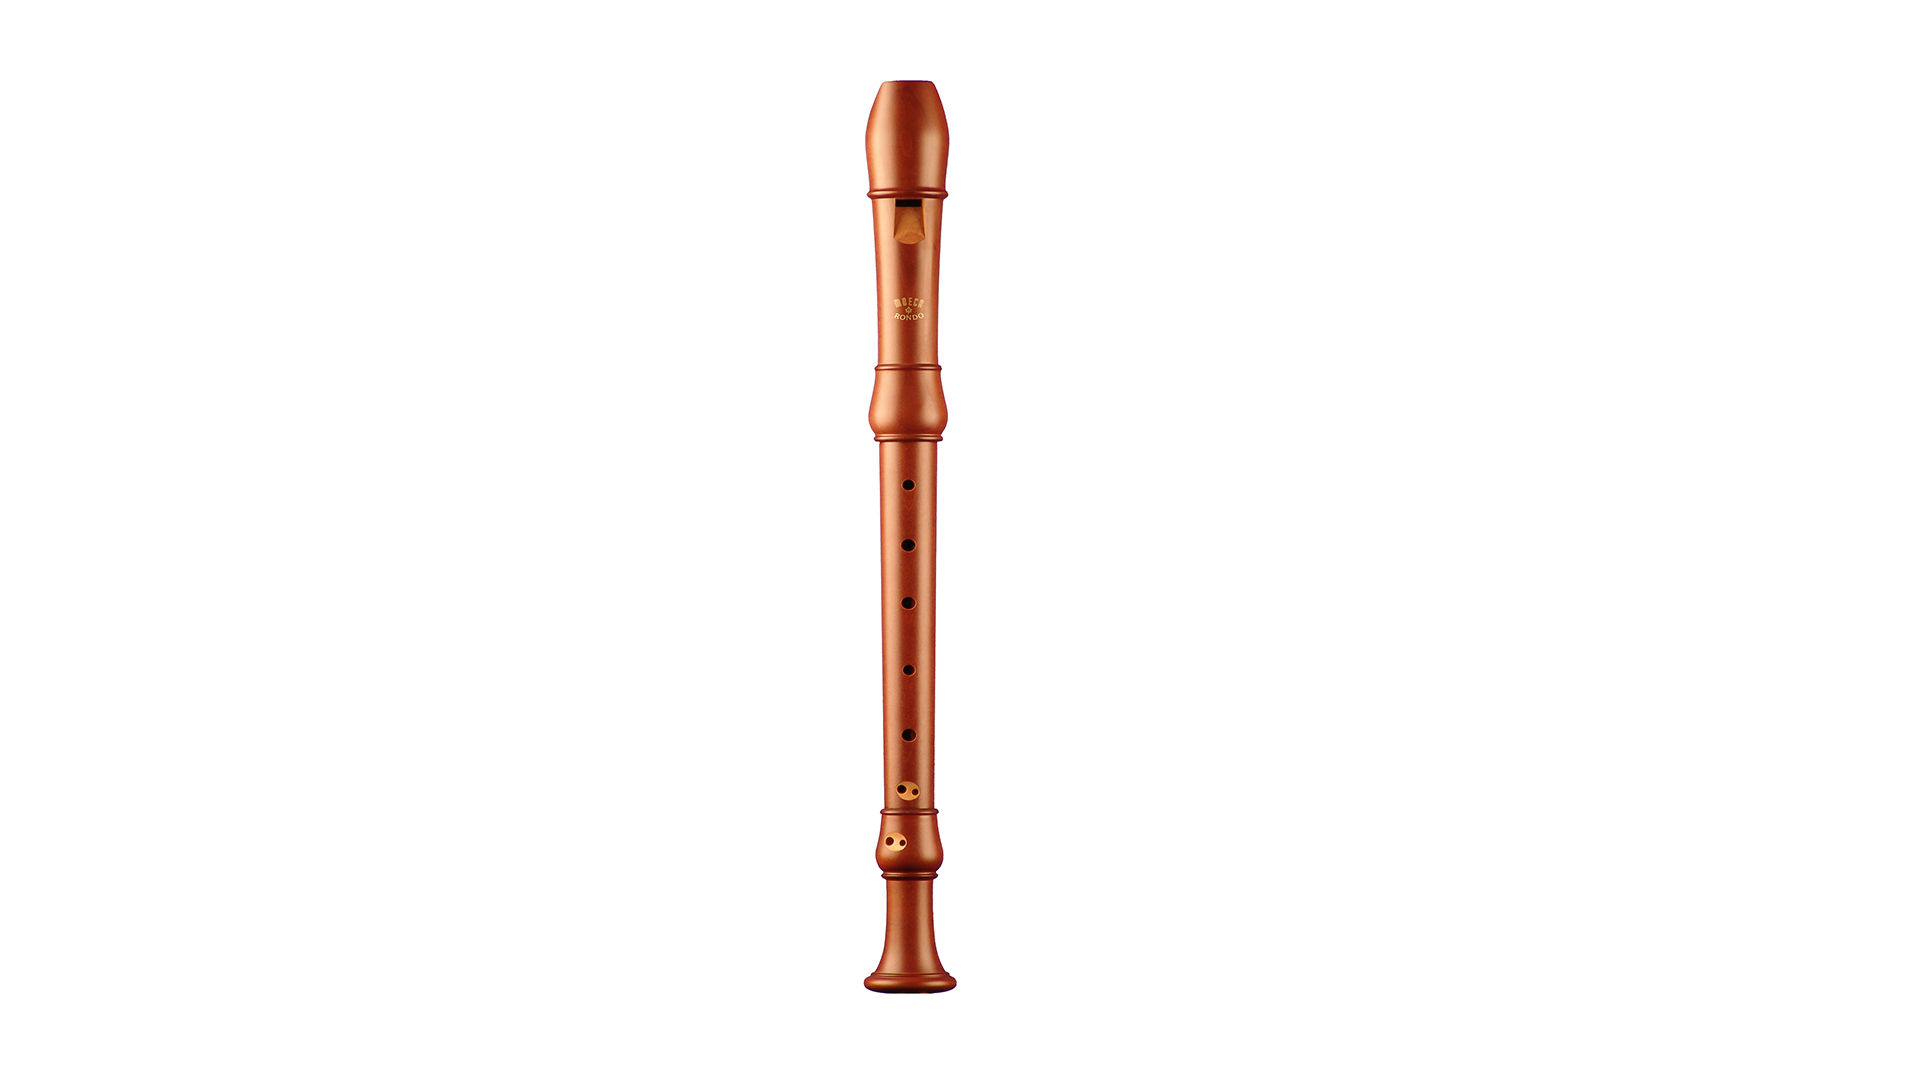 Moeck, "Flauto Rondo", alto in f', baroque double hole, pearwood stained